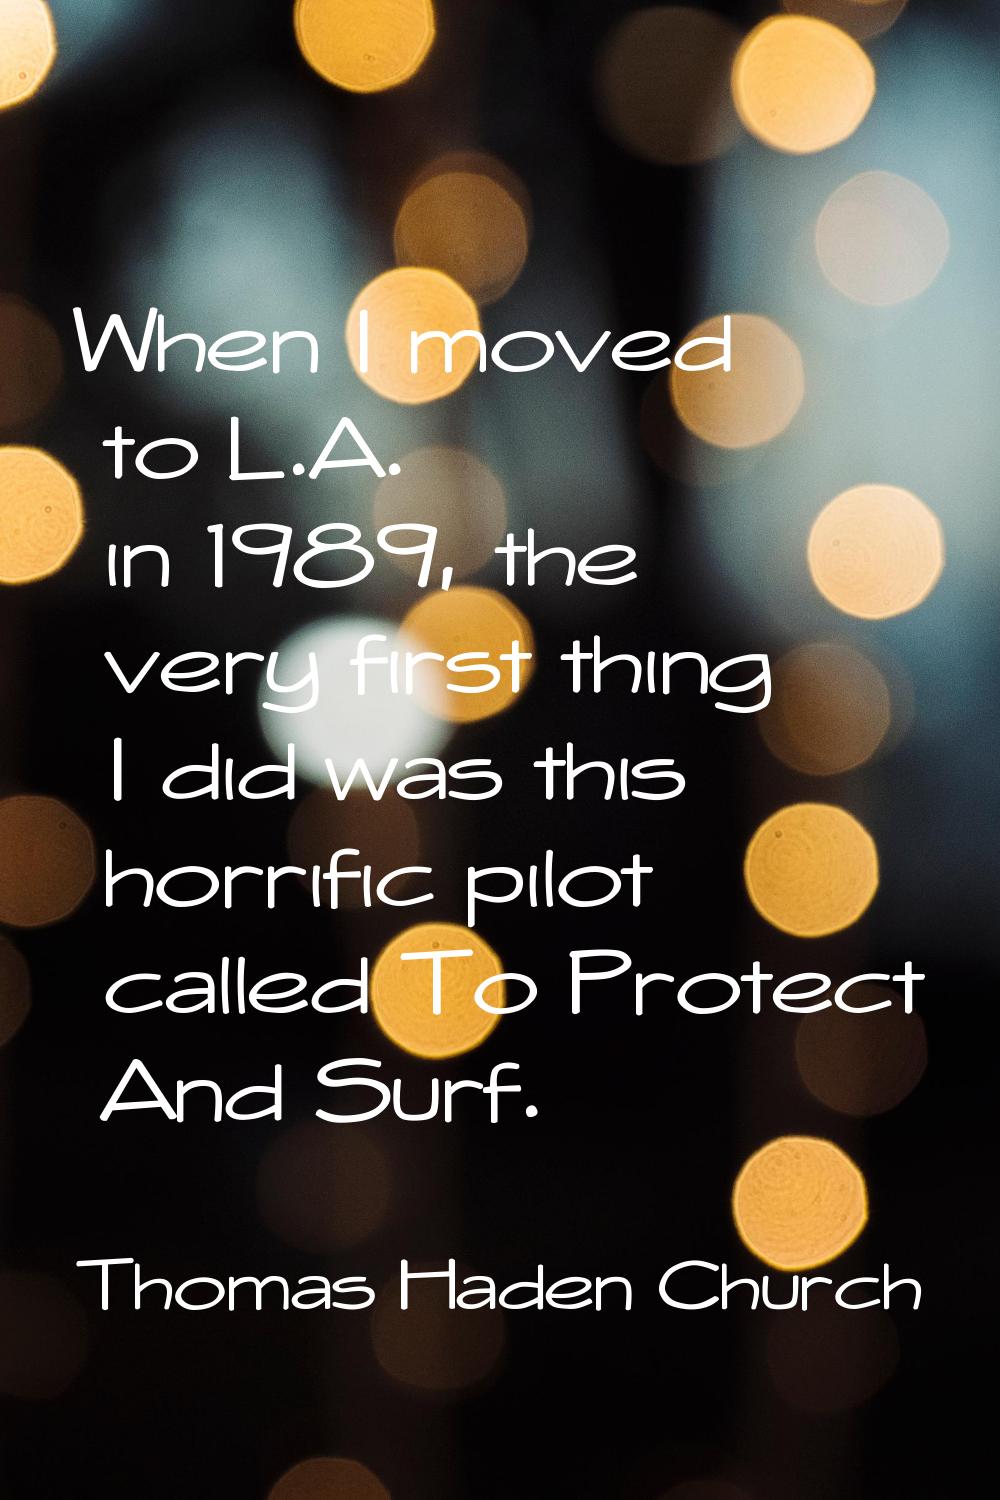 When I moved to L.A. in 1989, the very first thing I did was this horrific pilot called To Protect 